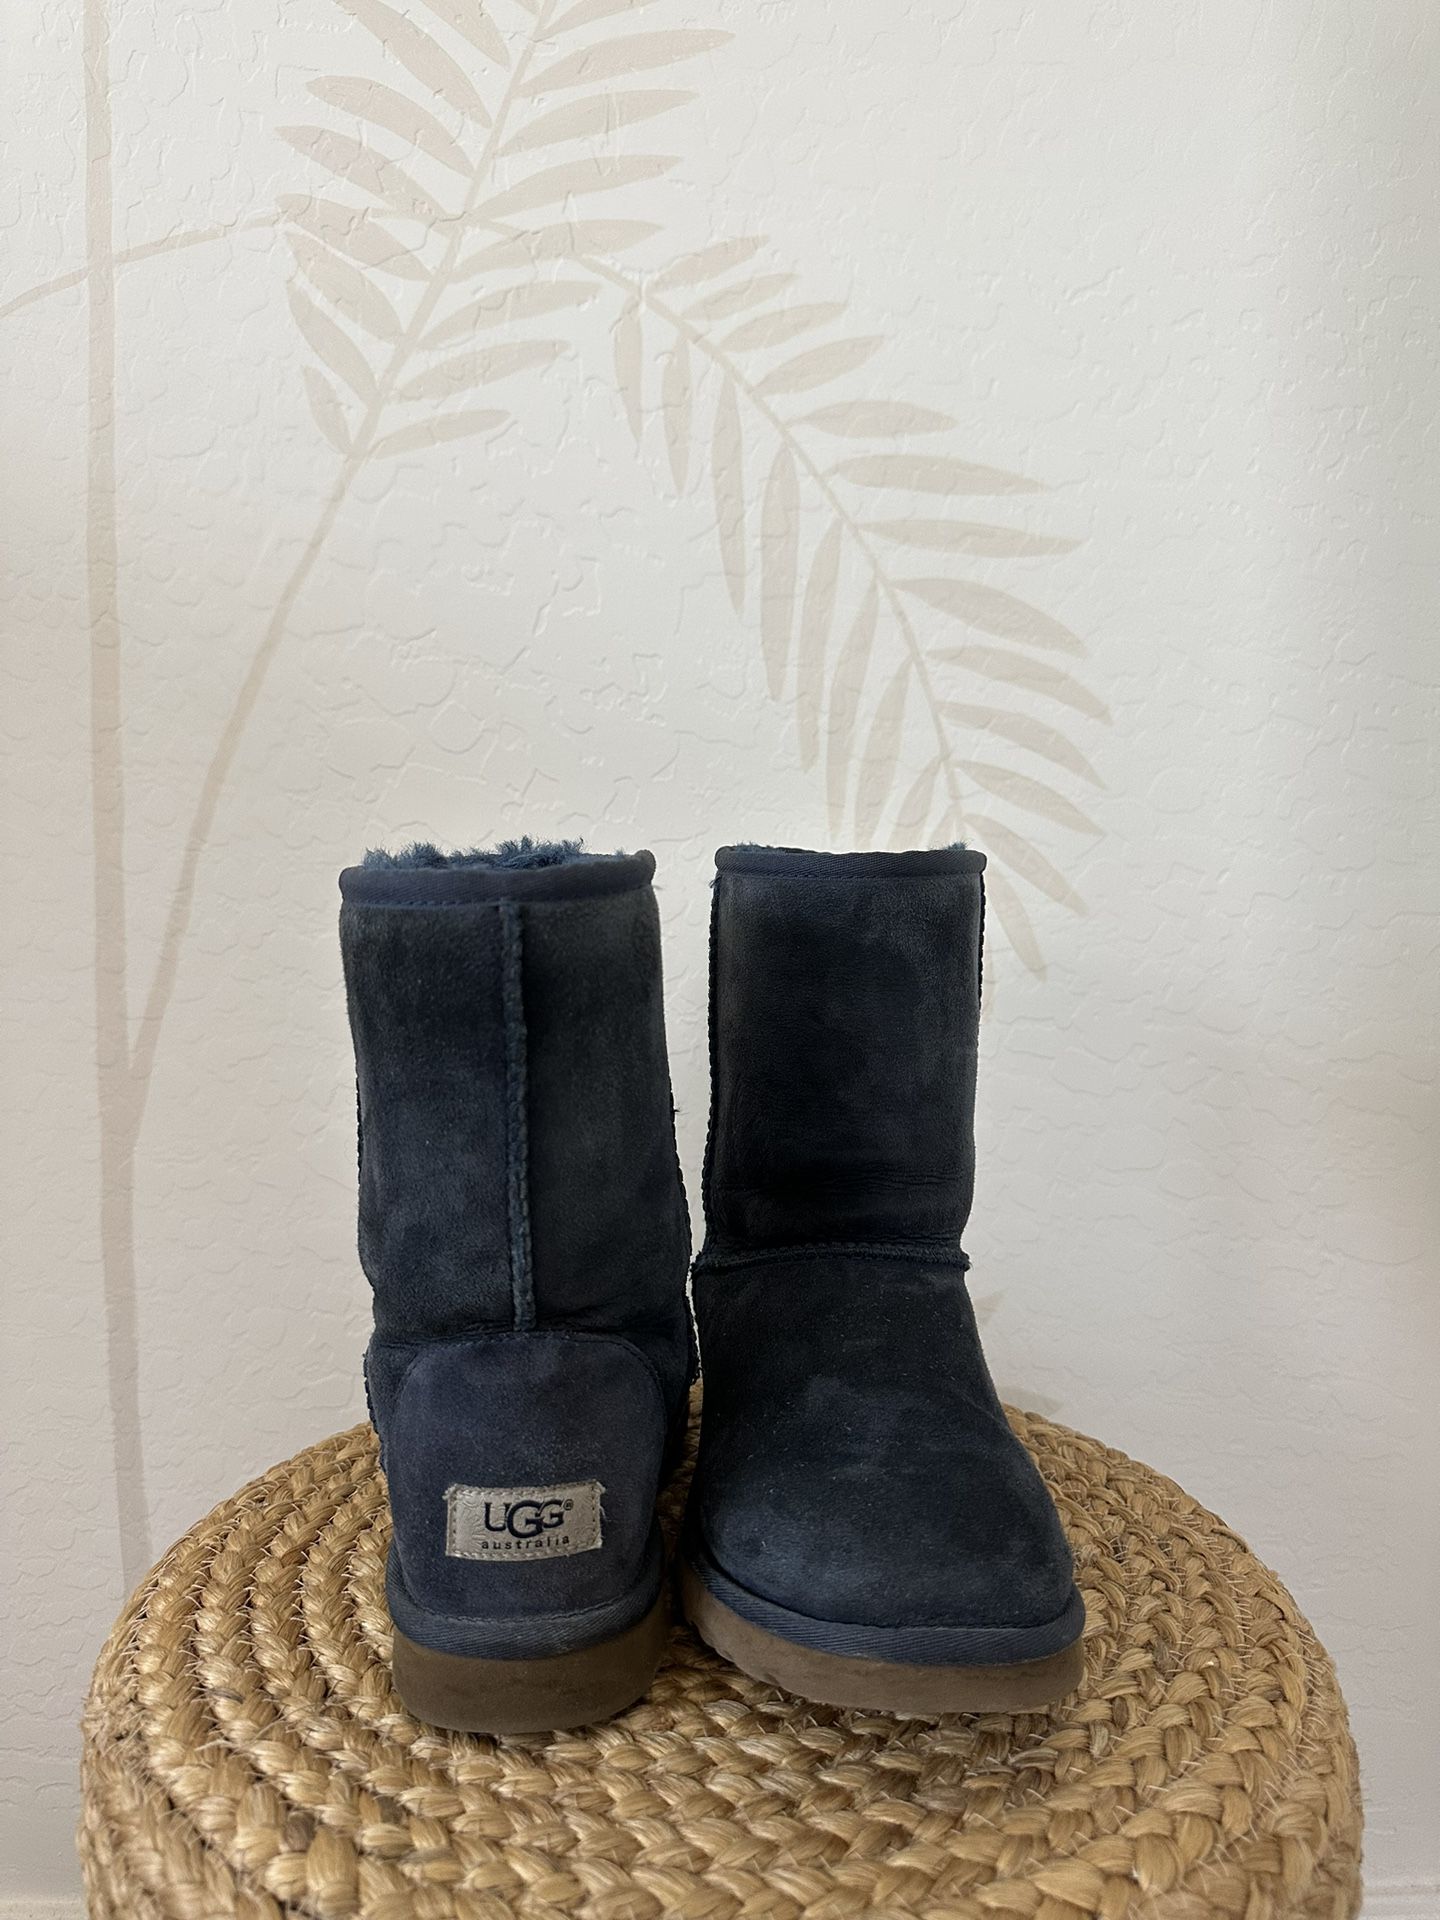 UGG Short Boots Navy Size 7